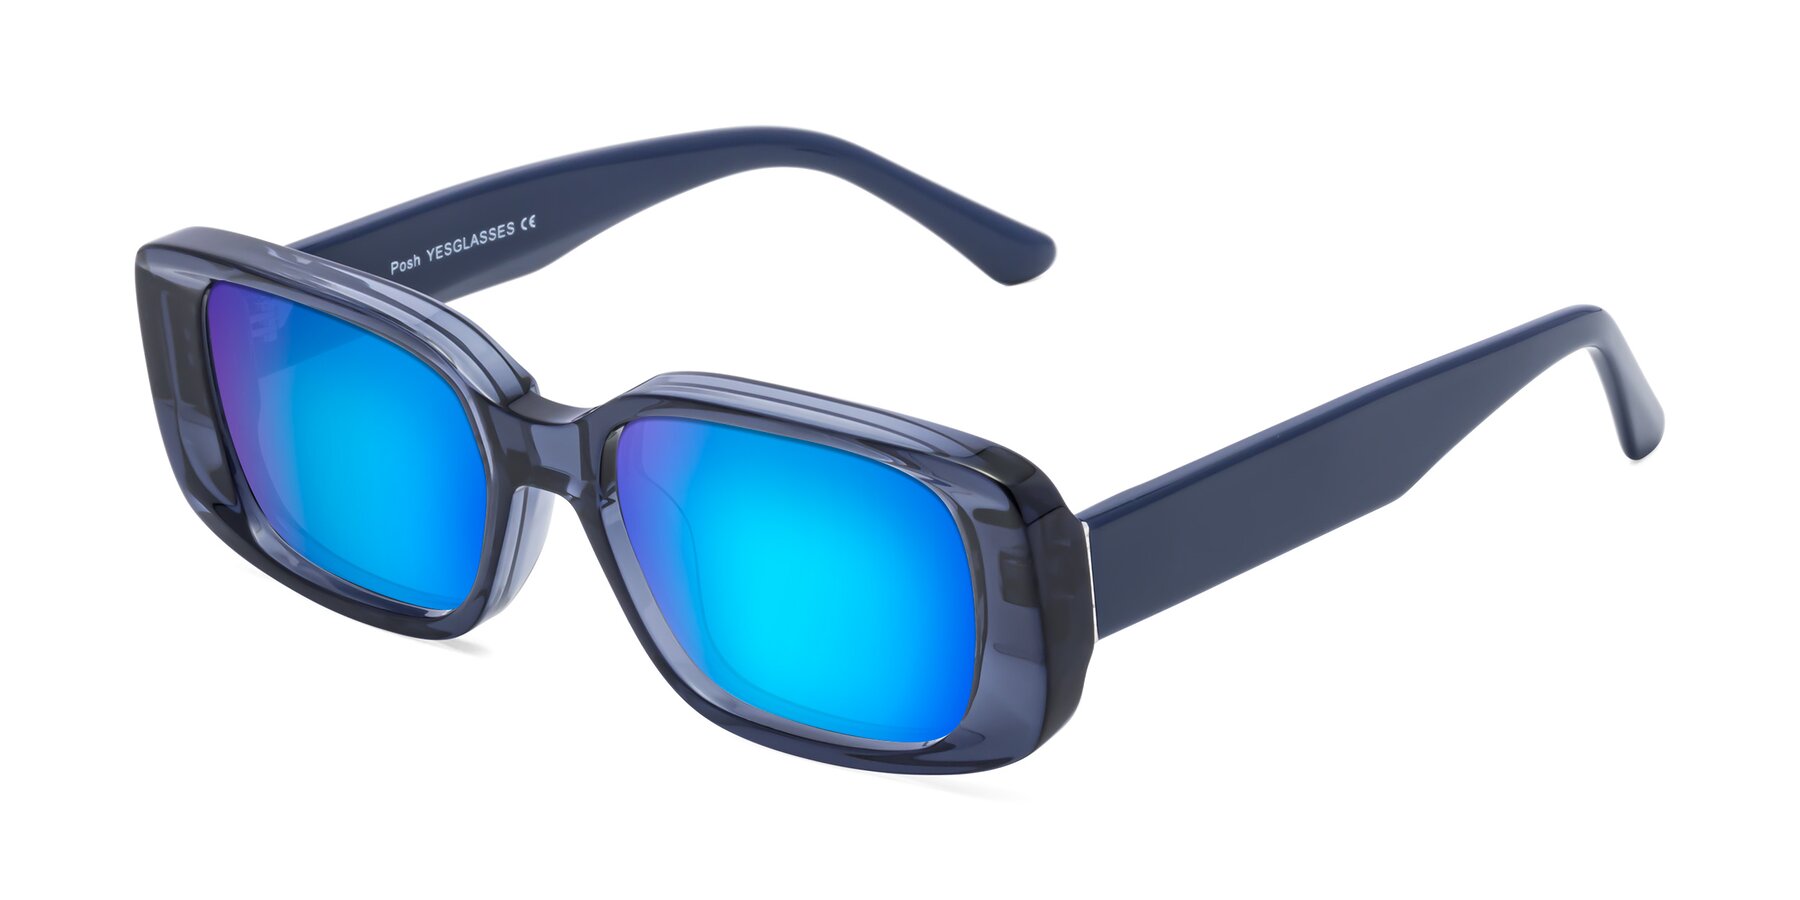 Angle of Posh in Translucent Blue with Blue Mirrored Lenses